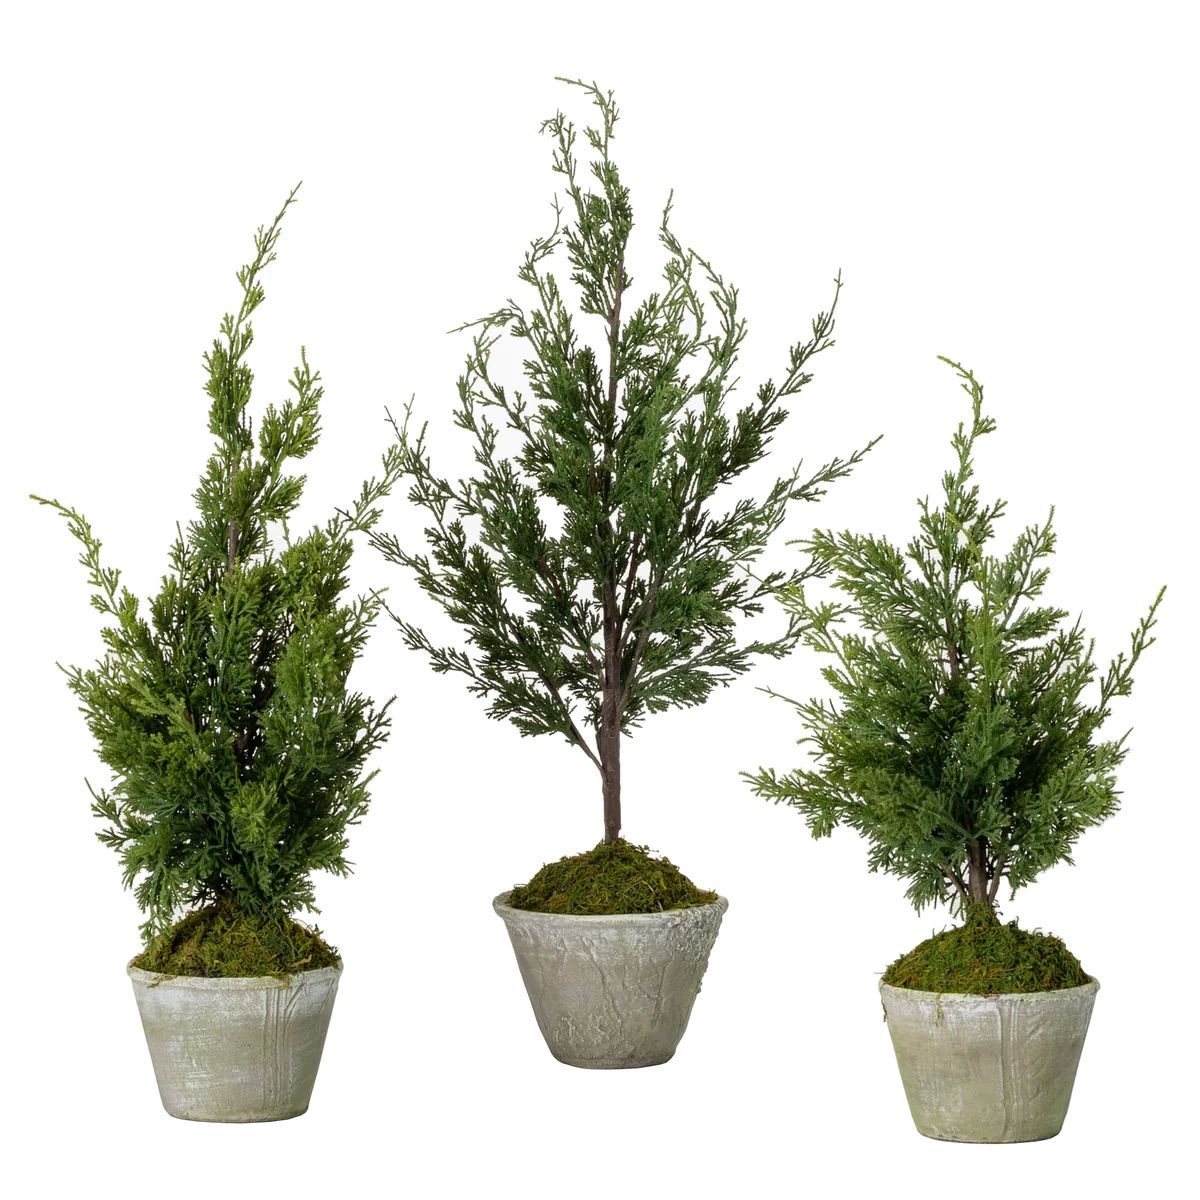 Potted Cedar Trees | Tuesday Made